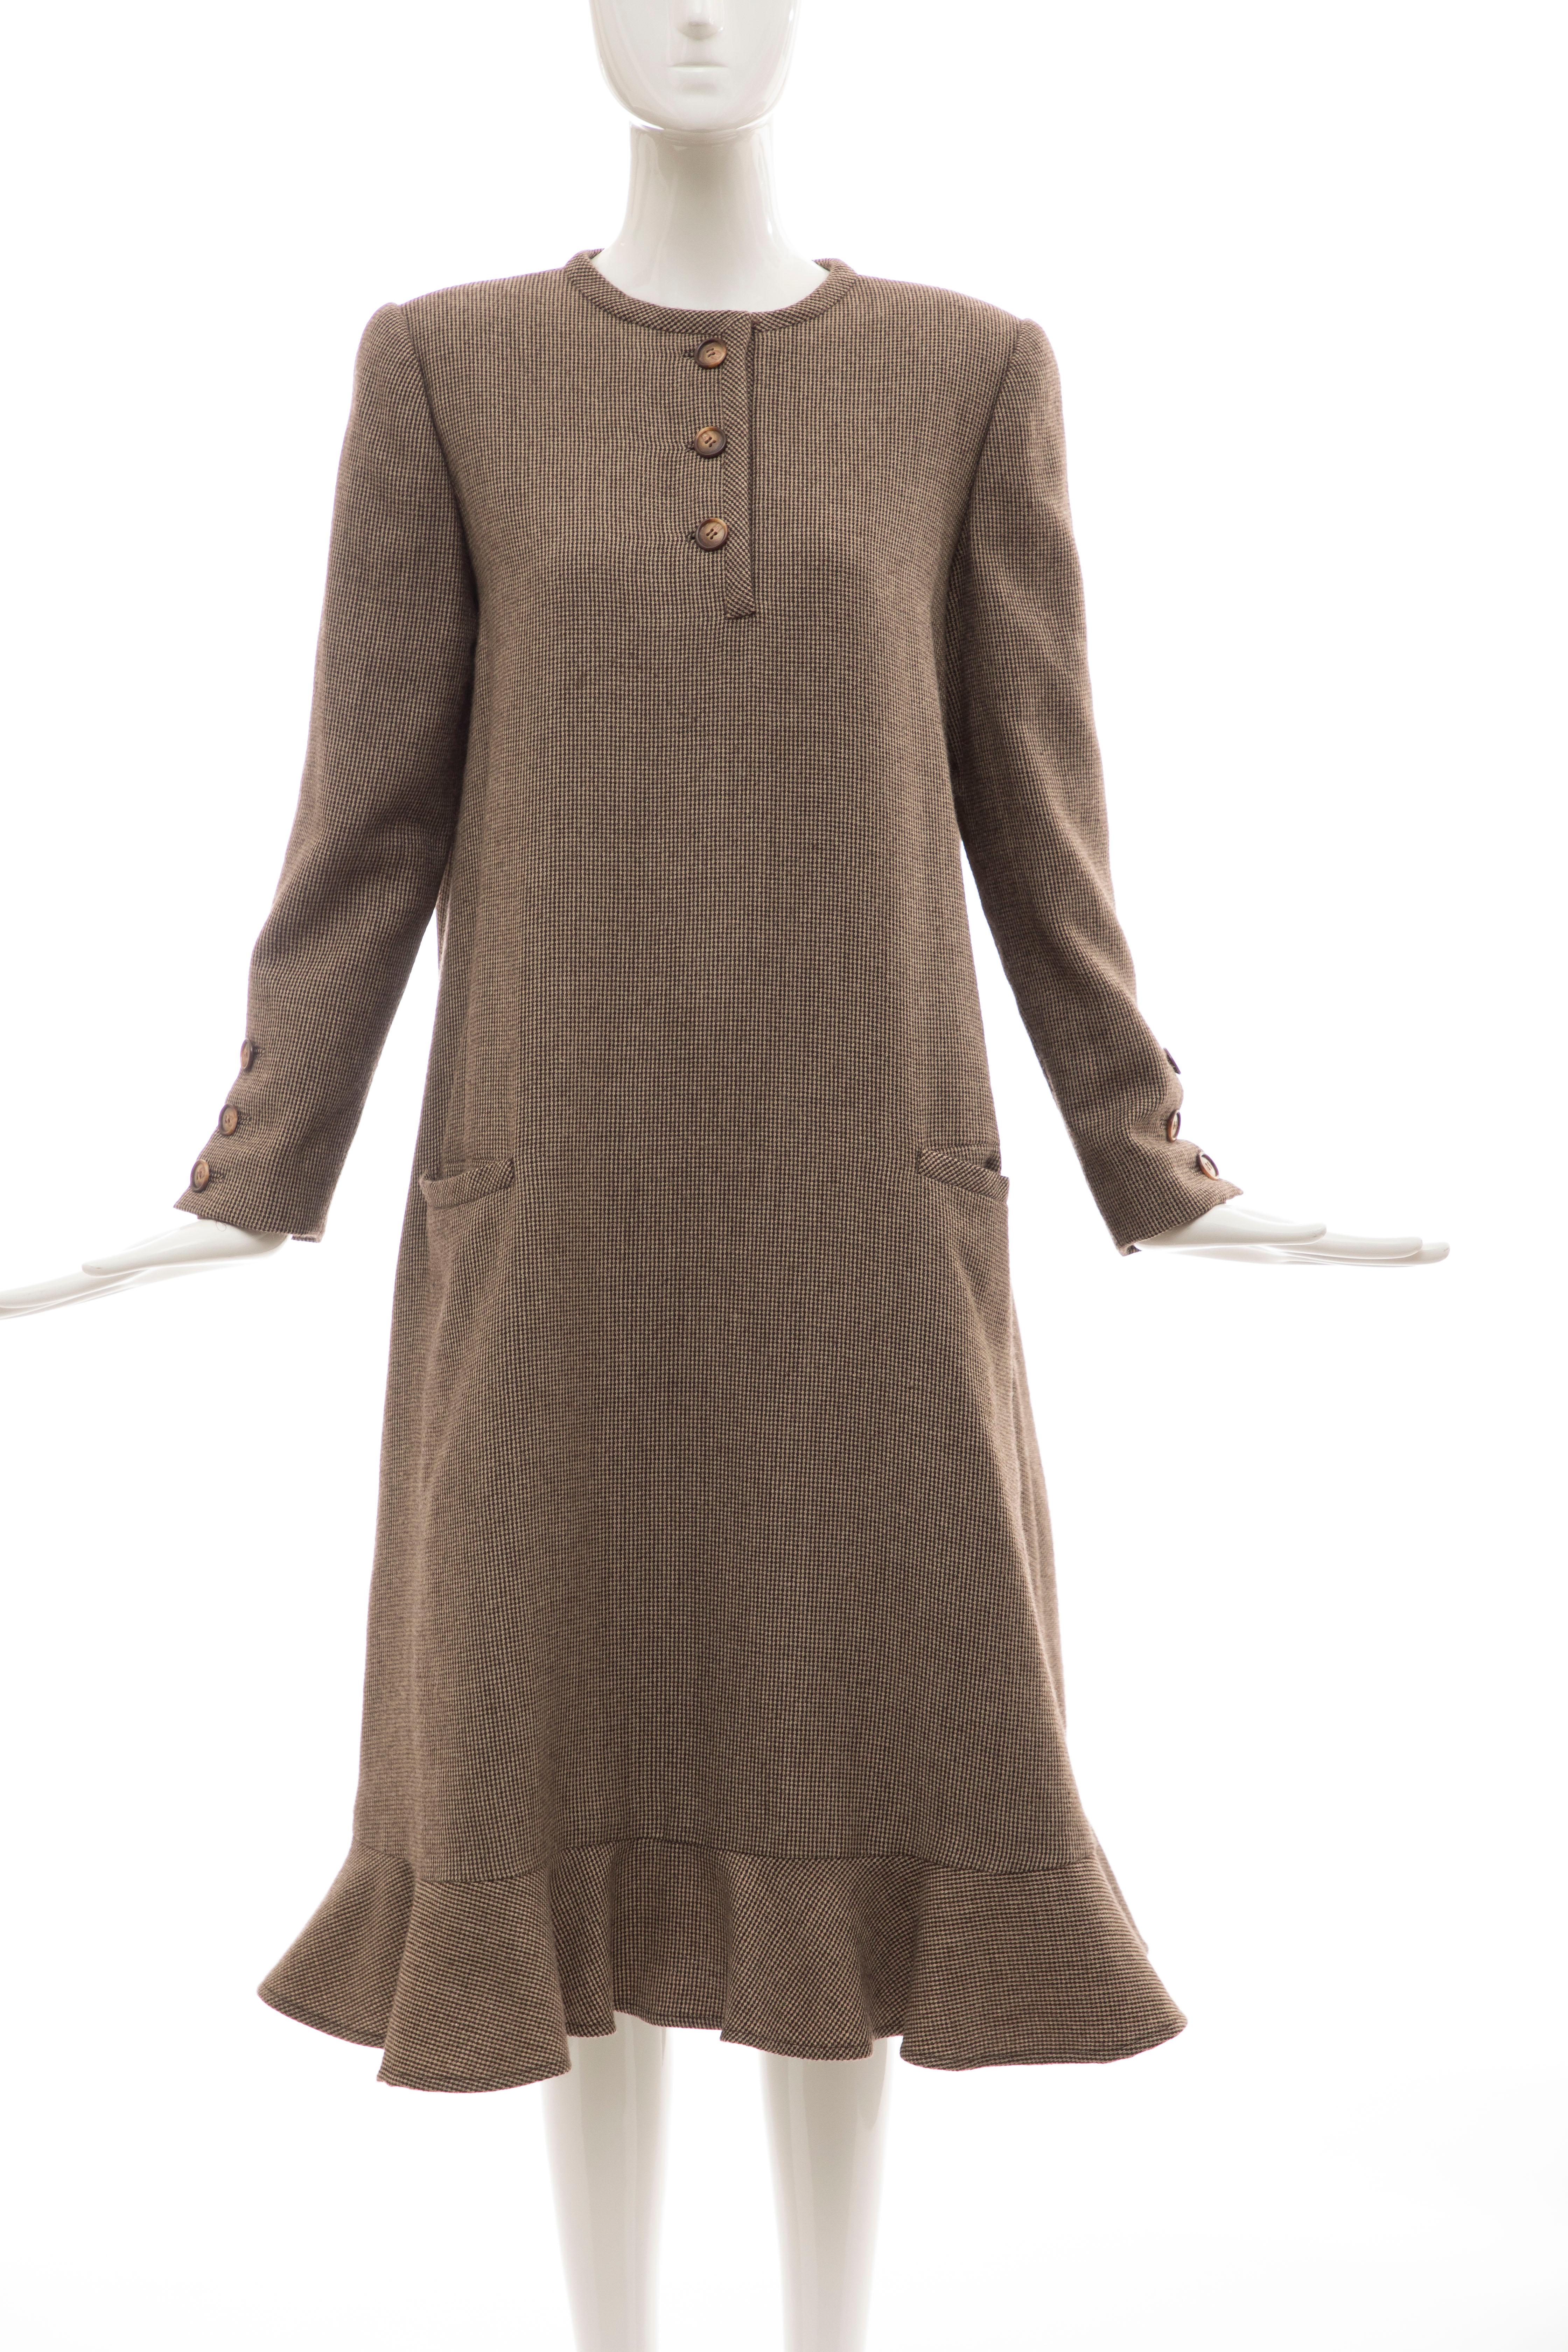 Bill Blass, Circa: 1970's long-sleeve A-line wool brown tweed button front dress, back zip with two front slit pockets and fully lined in silk.

US. 8

Bust: 40, Waist: 46, Hip: 56, Sleeve: 23, Shoulder: 16, Length: 45
